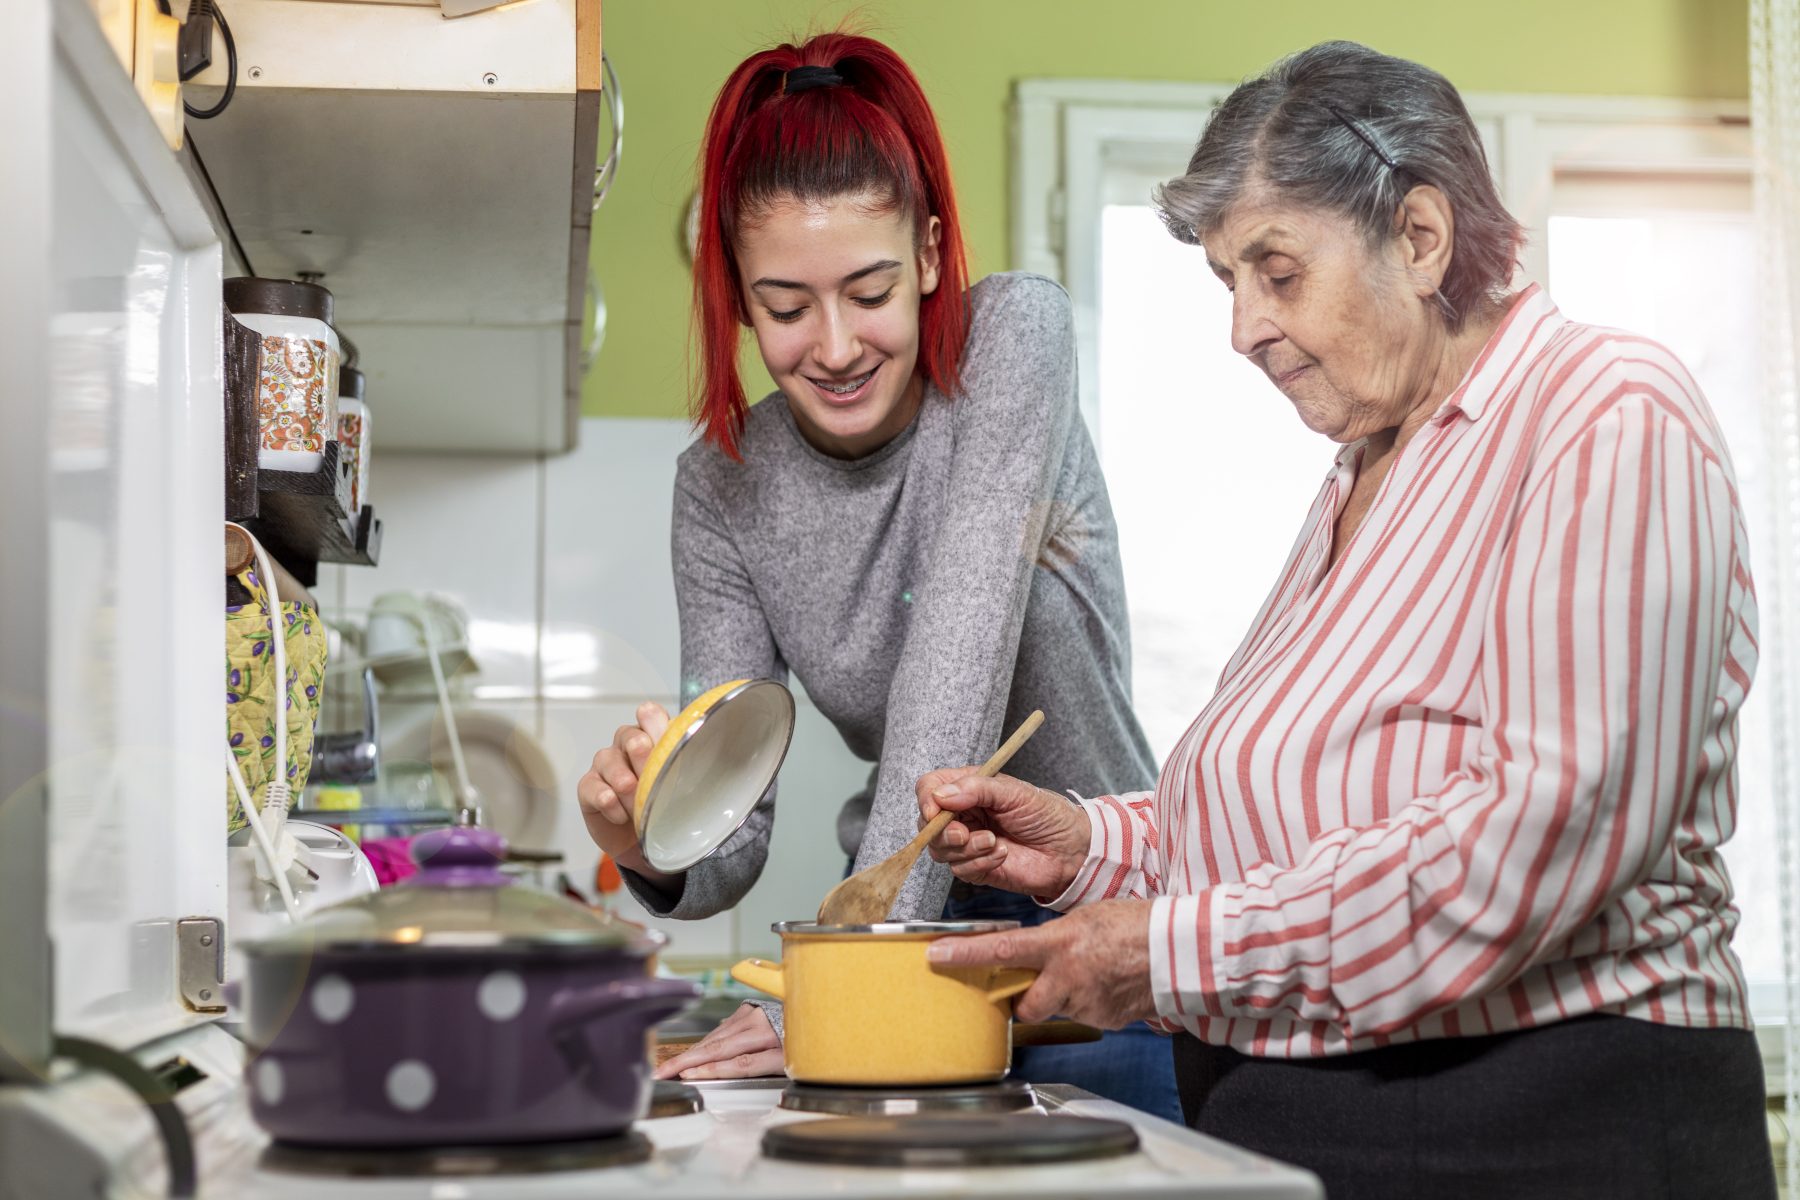 Young woman helping older woman cook at the stove.